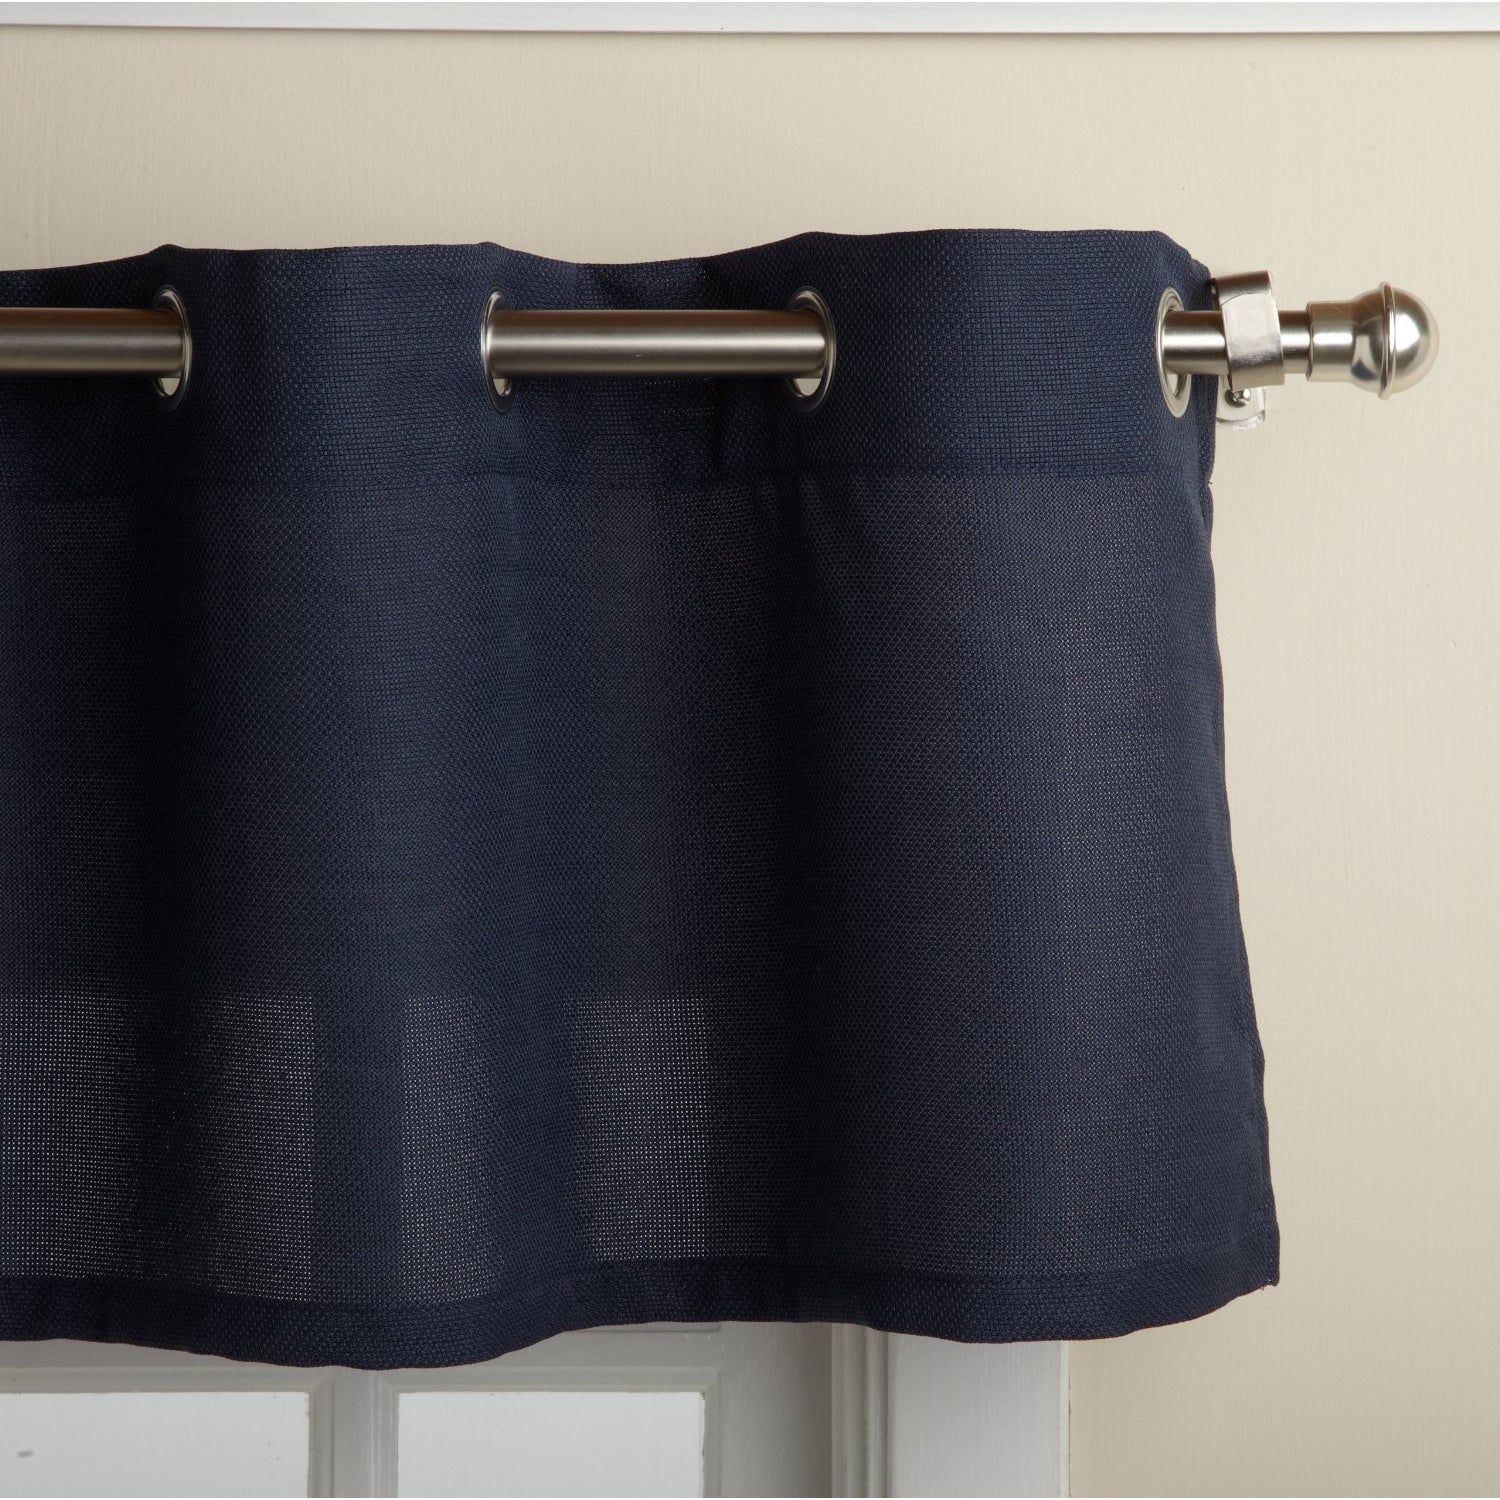 Modern Subtle Texture Solid Navy Kitchen Curtain Parts With Grommets  Tier  And Valance Options Regarding Modern Subtle Texture Solid Red Kitchen Curtains (View 15 of 20)